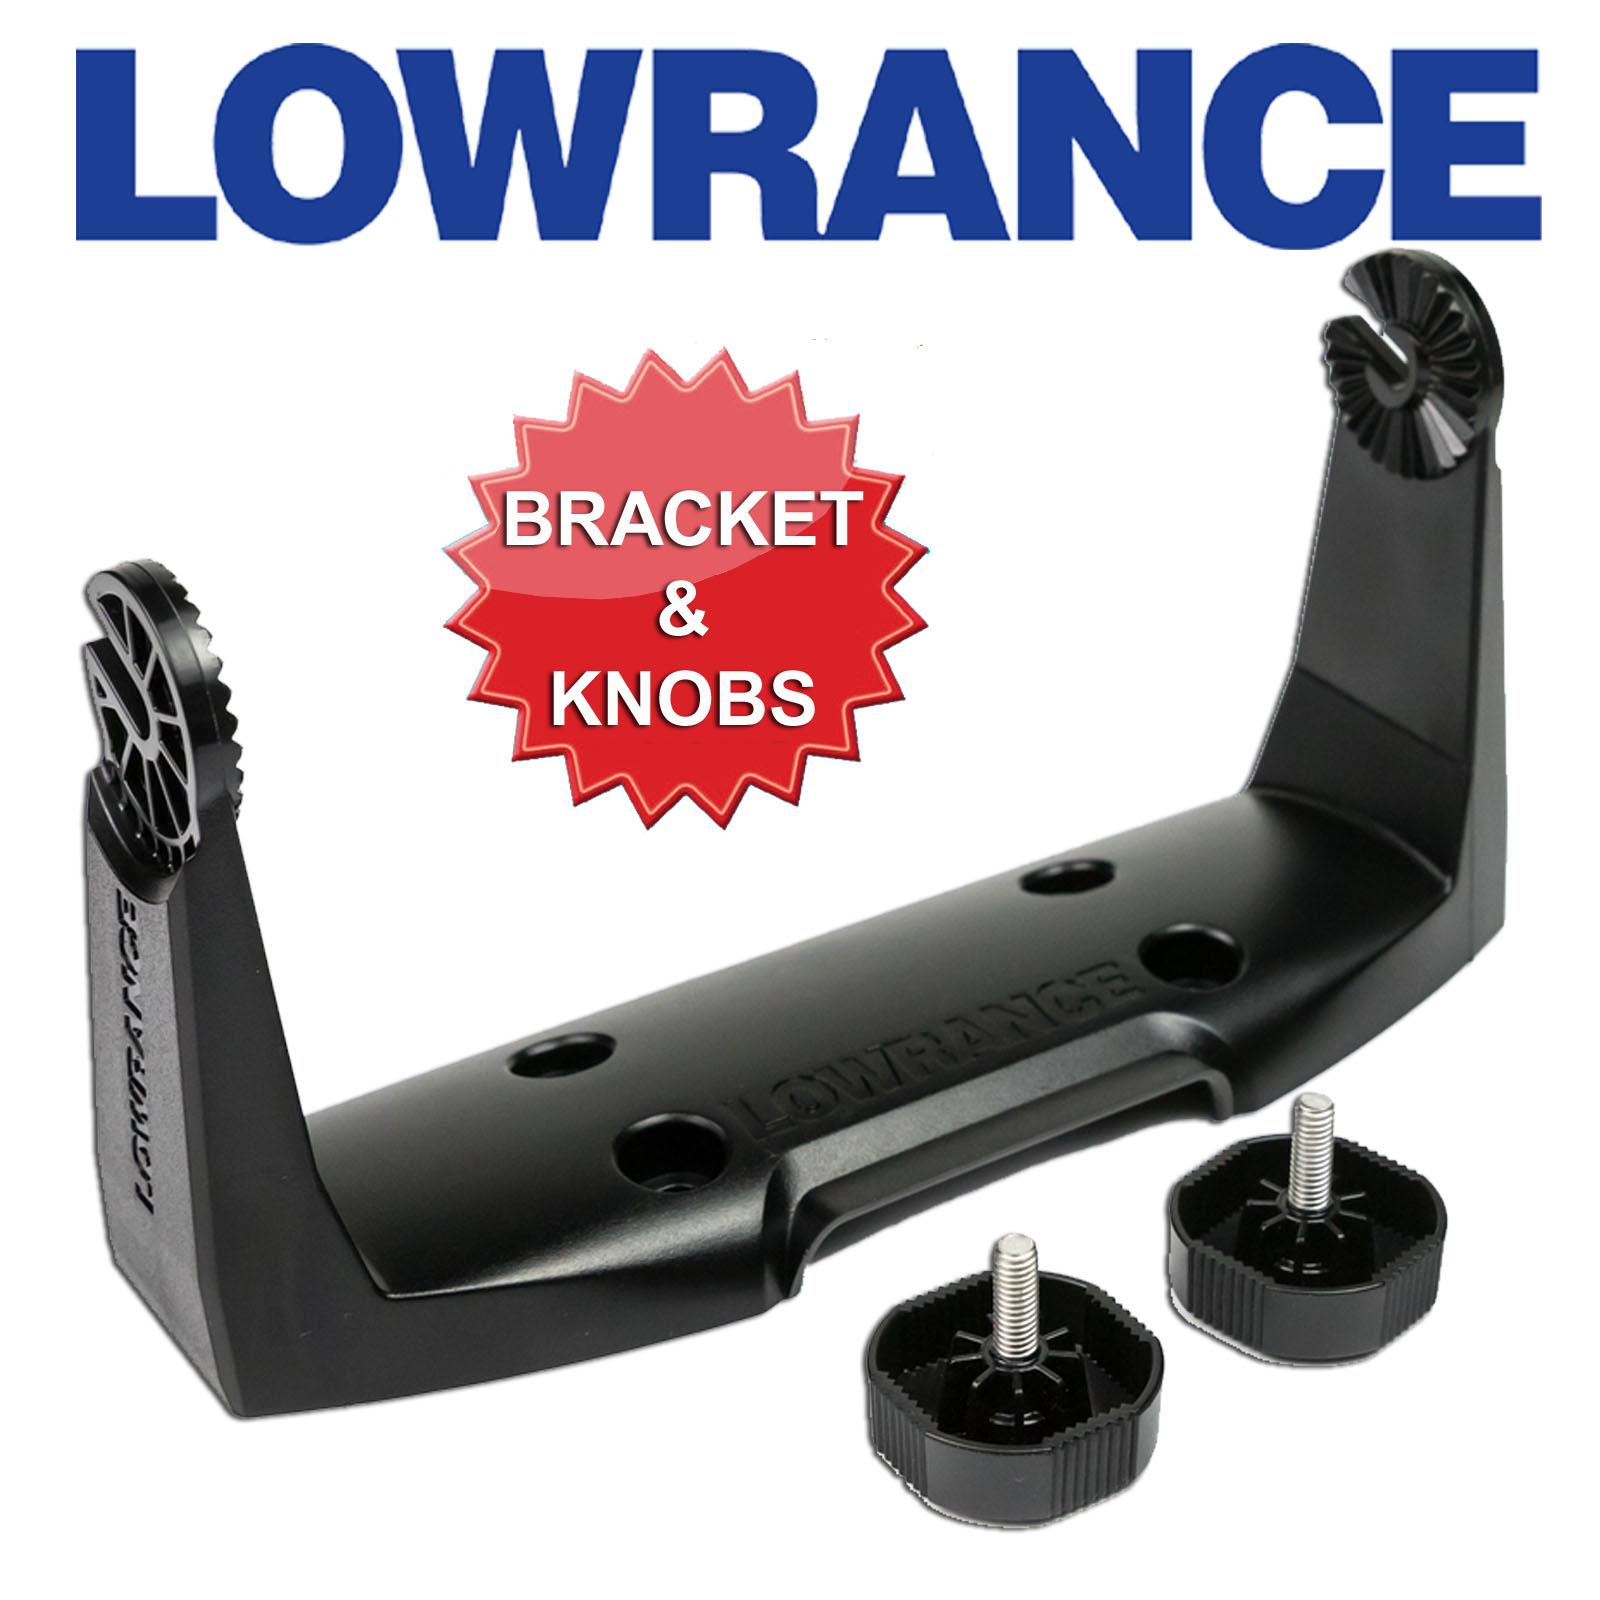 000-11019-001 Gimbal Bracket Mounting Bracket with Knobs for Lowrance HDS-7  Touchscreen Models HDS Gen3, Gen2 , Elite and Hook 7